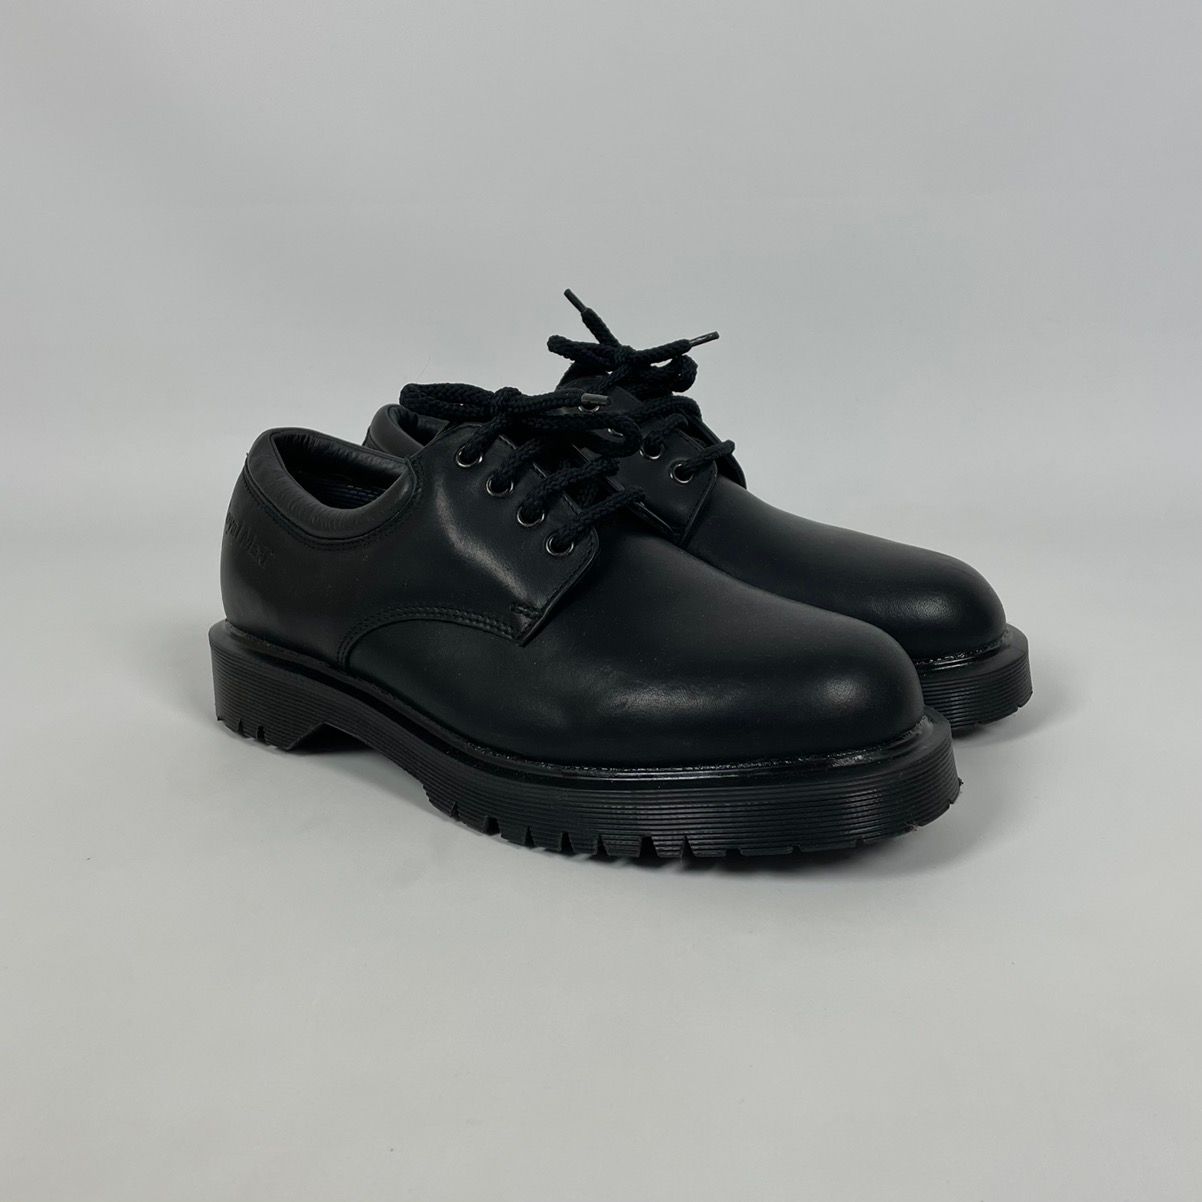 Dr. Martens Vintage Dr. Martens Royal Mail Shoes Made in England Size US 9 / EU 42 - 1 Preview